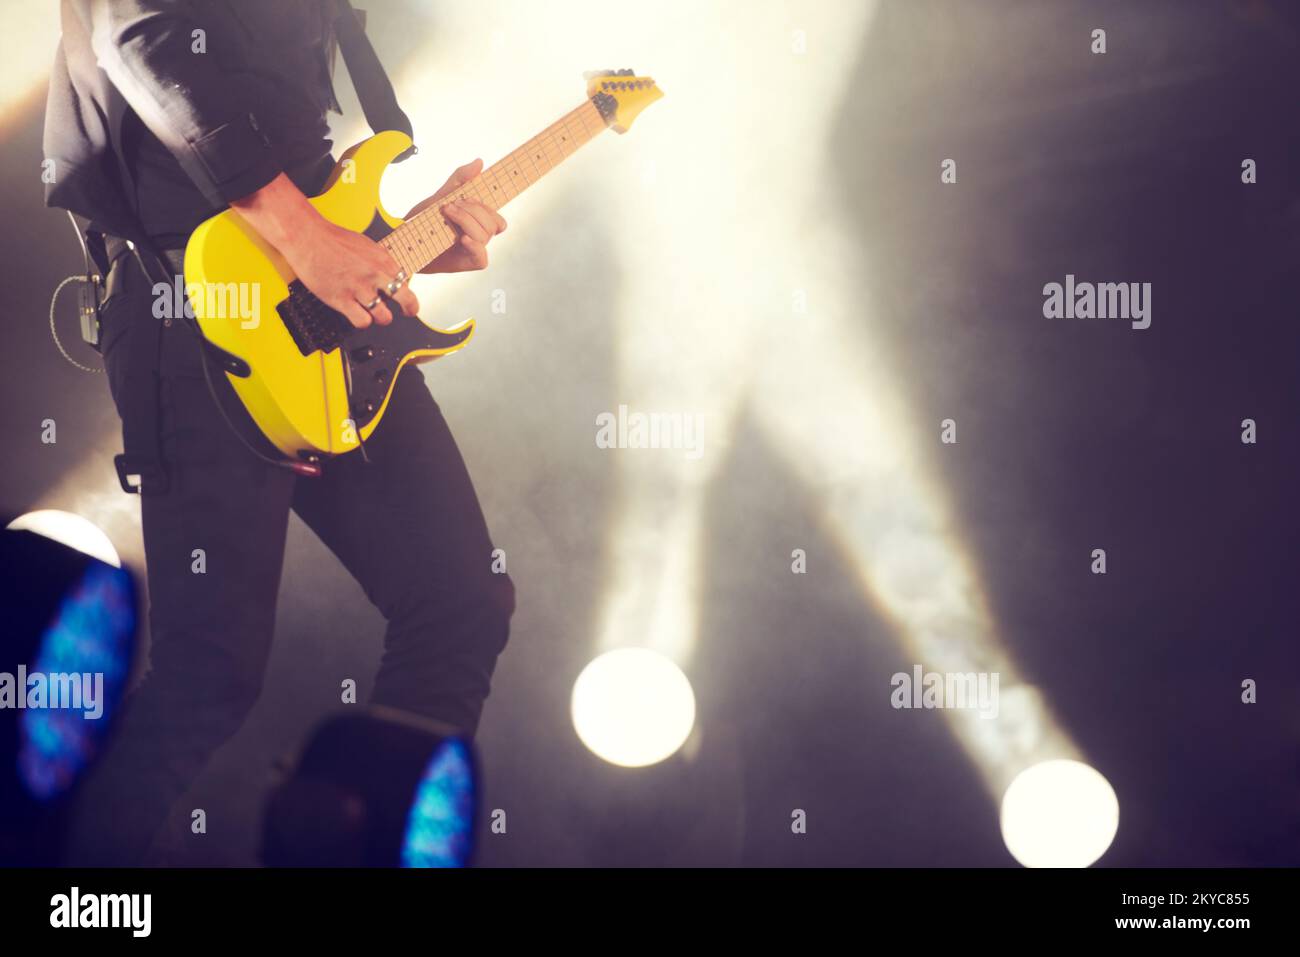 Make those string sing. a musician performing a guitar solo on the stage. Stock Photo